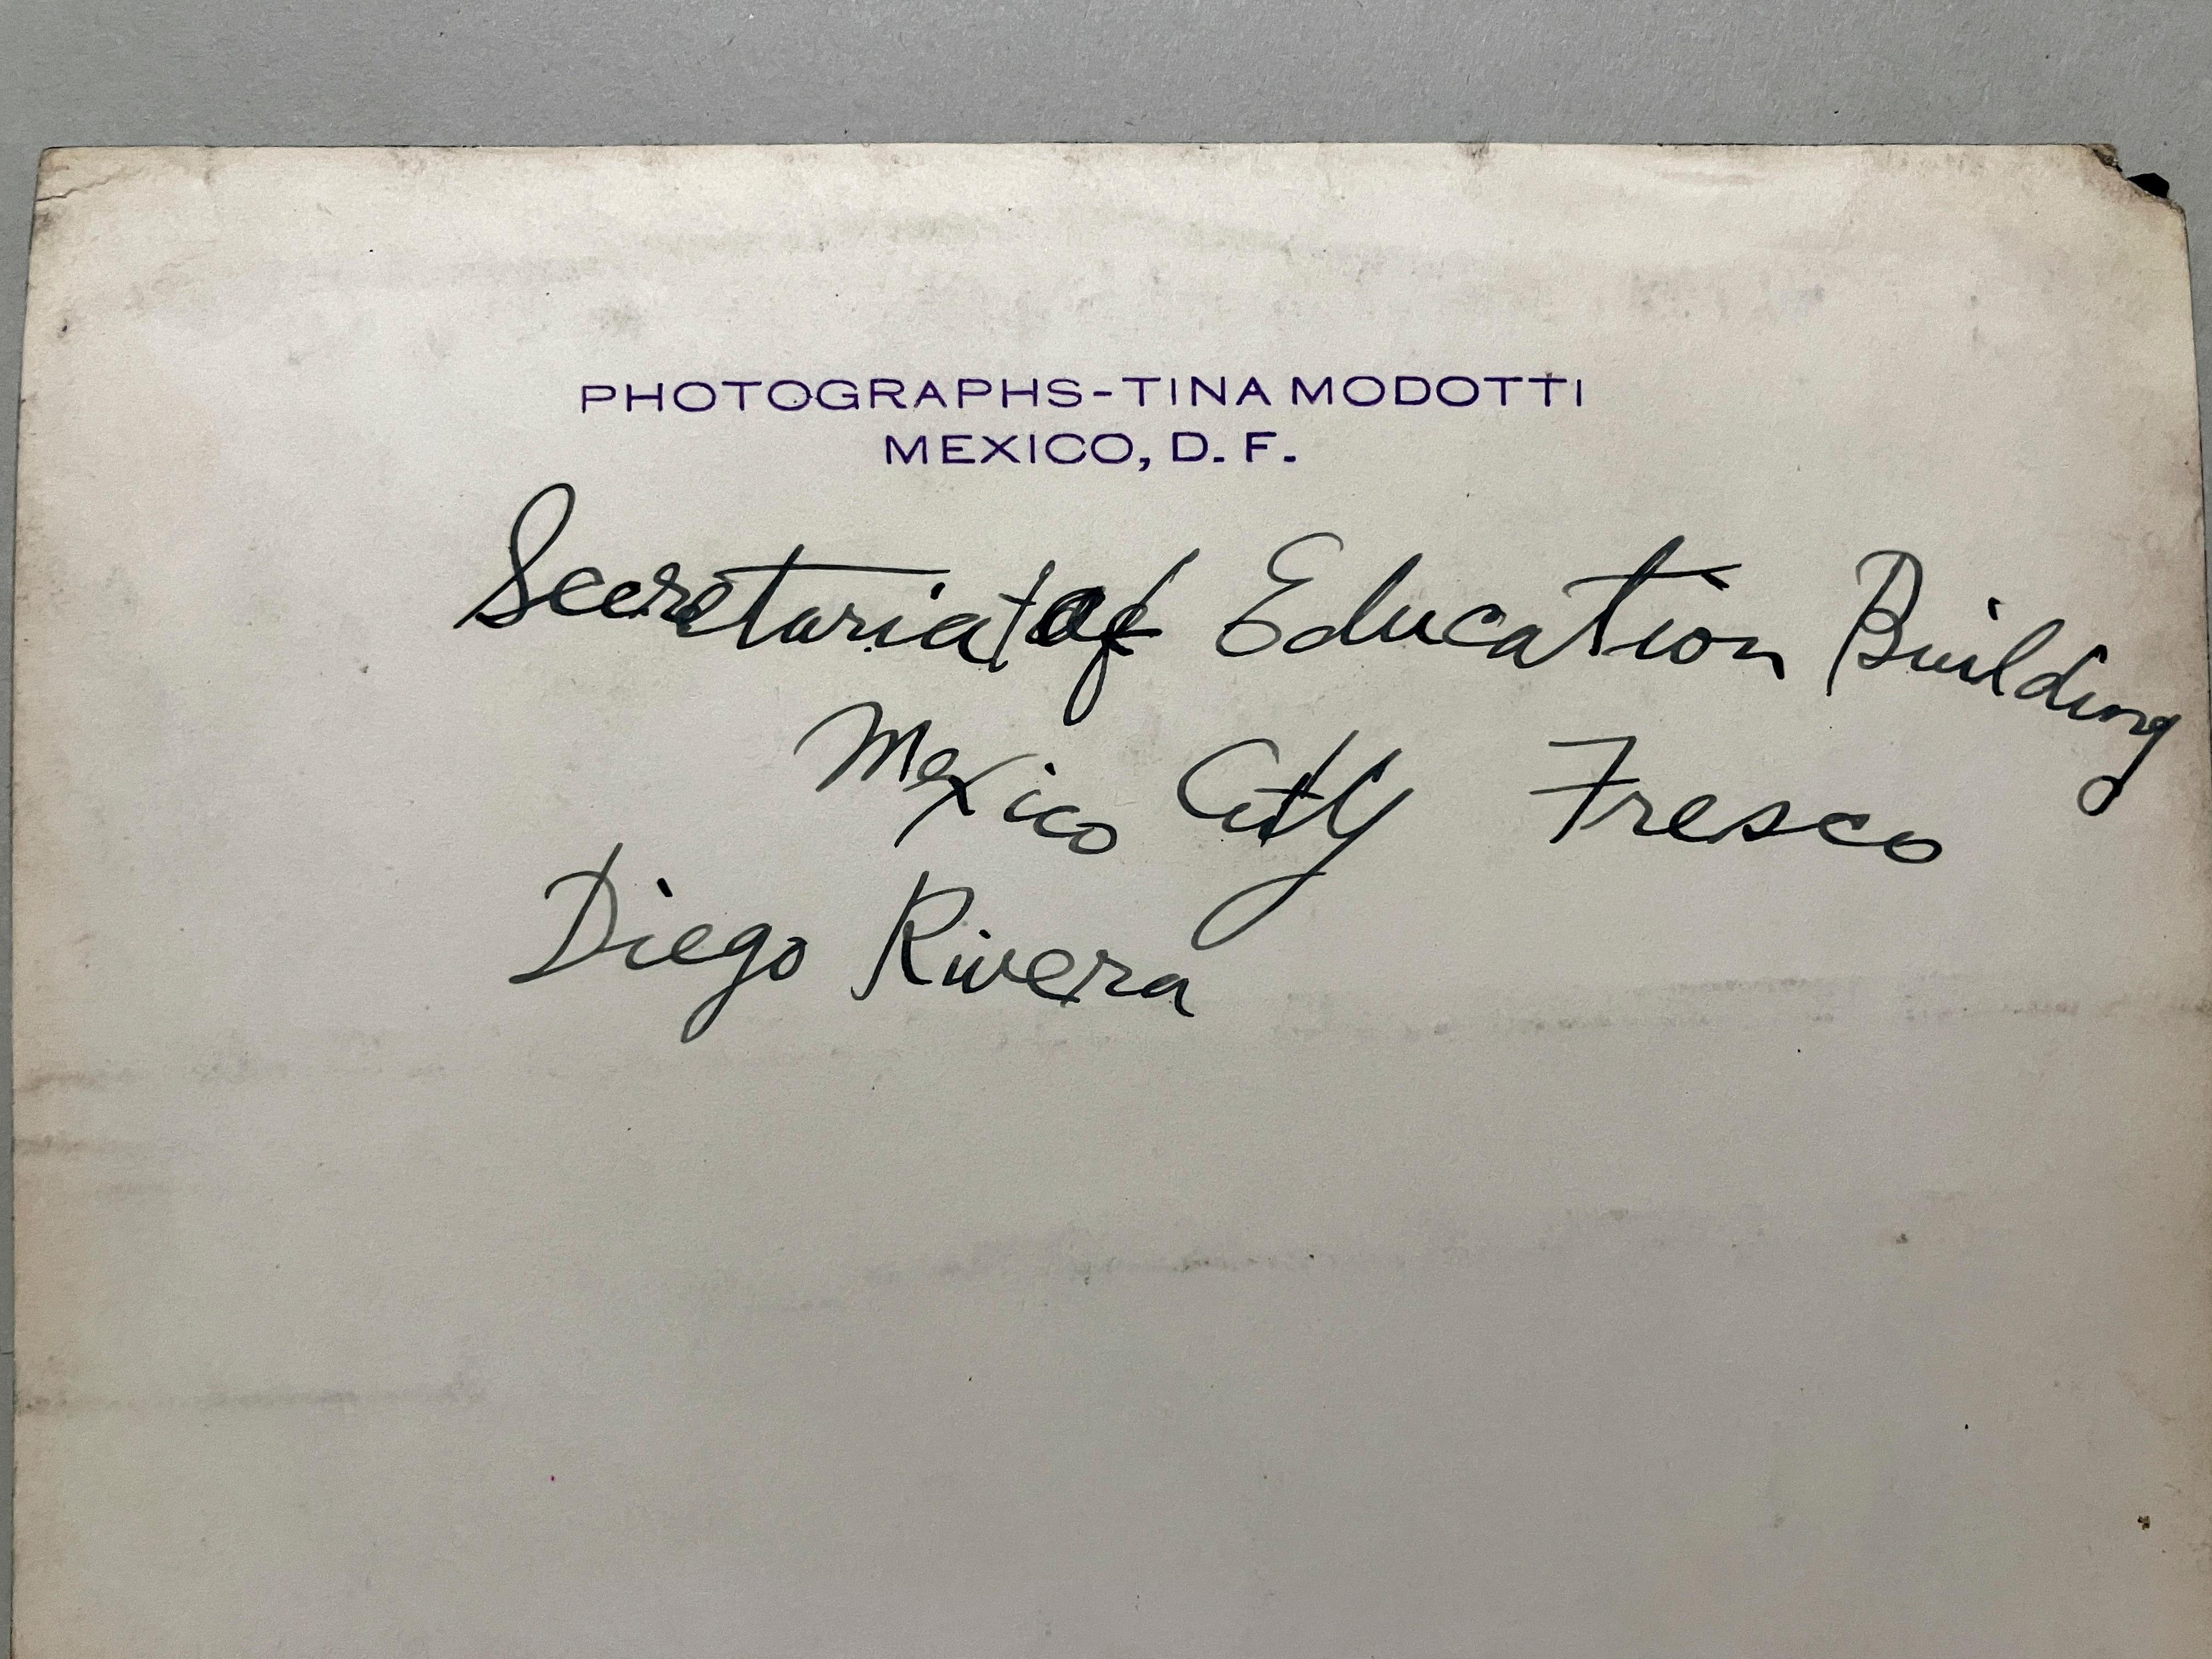 An original 1920s silver gelatin print by photographer Tina Modotti, that shows a fresco in the Secretariat of Education Buiilding, Mexico City that illustrates a popular ballad.  Photo is stamped “Photographs-Tina Modotti Mexico, D.F.” on reverse. 